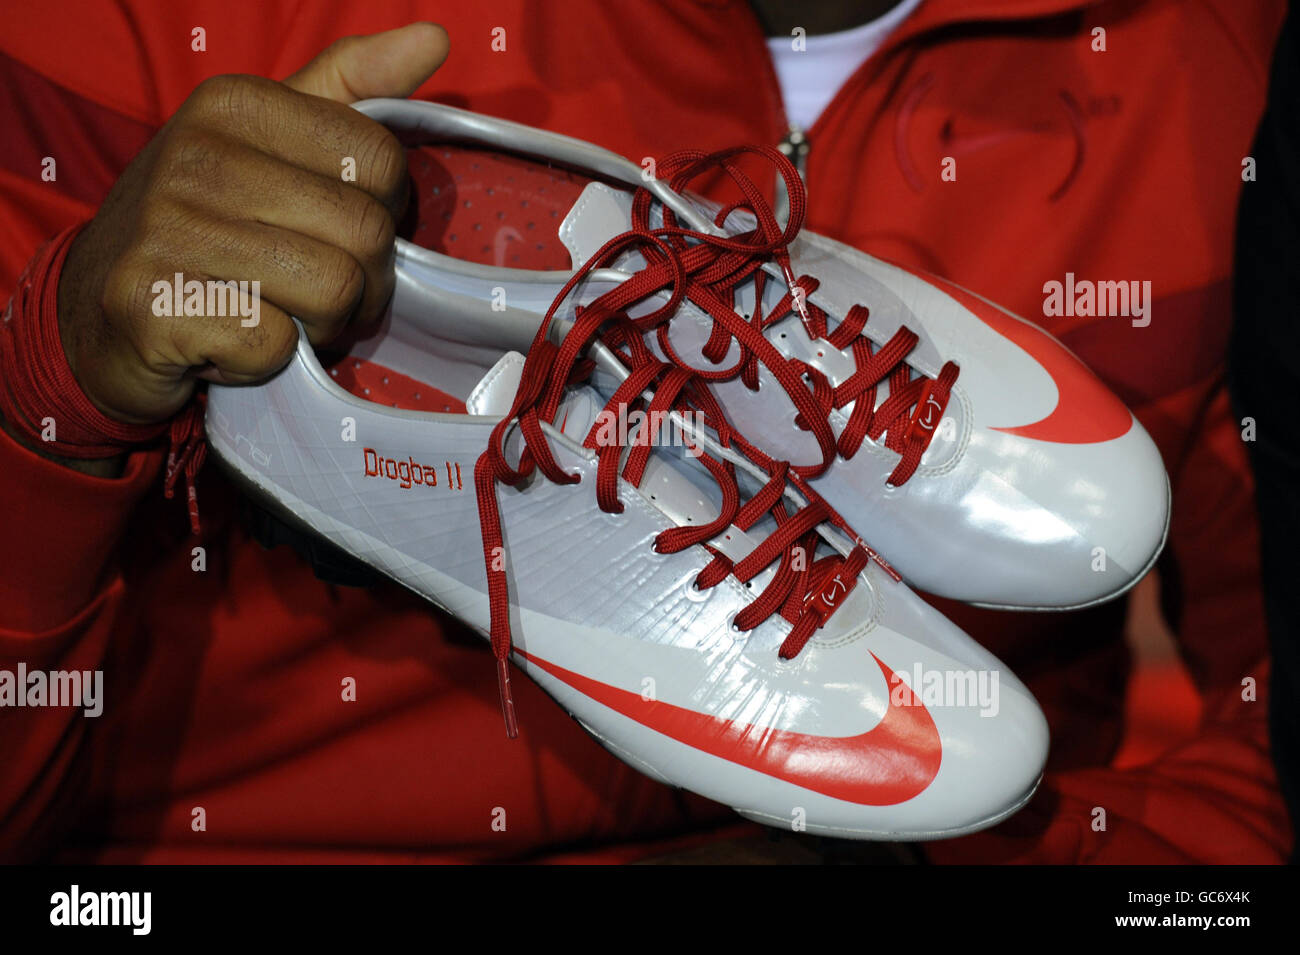 Misunderstand Annotate educator Didier Drogba's boots during the Nike Global Announcement Press Conference  at Town London, London Stock Photo - Alamy